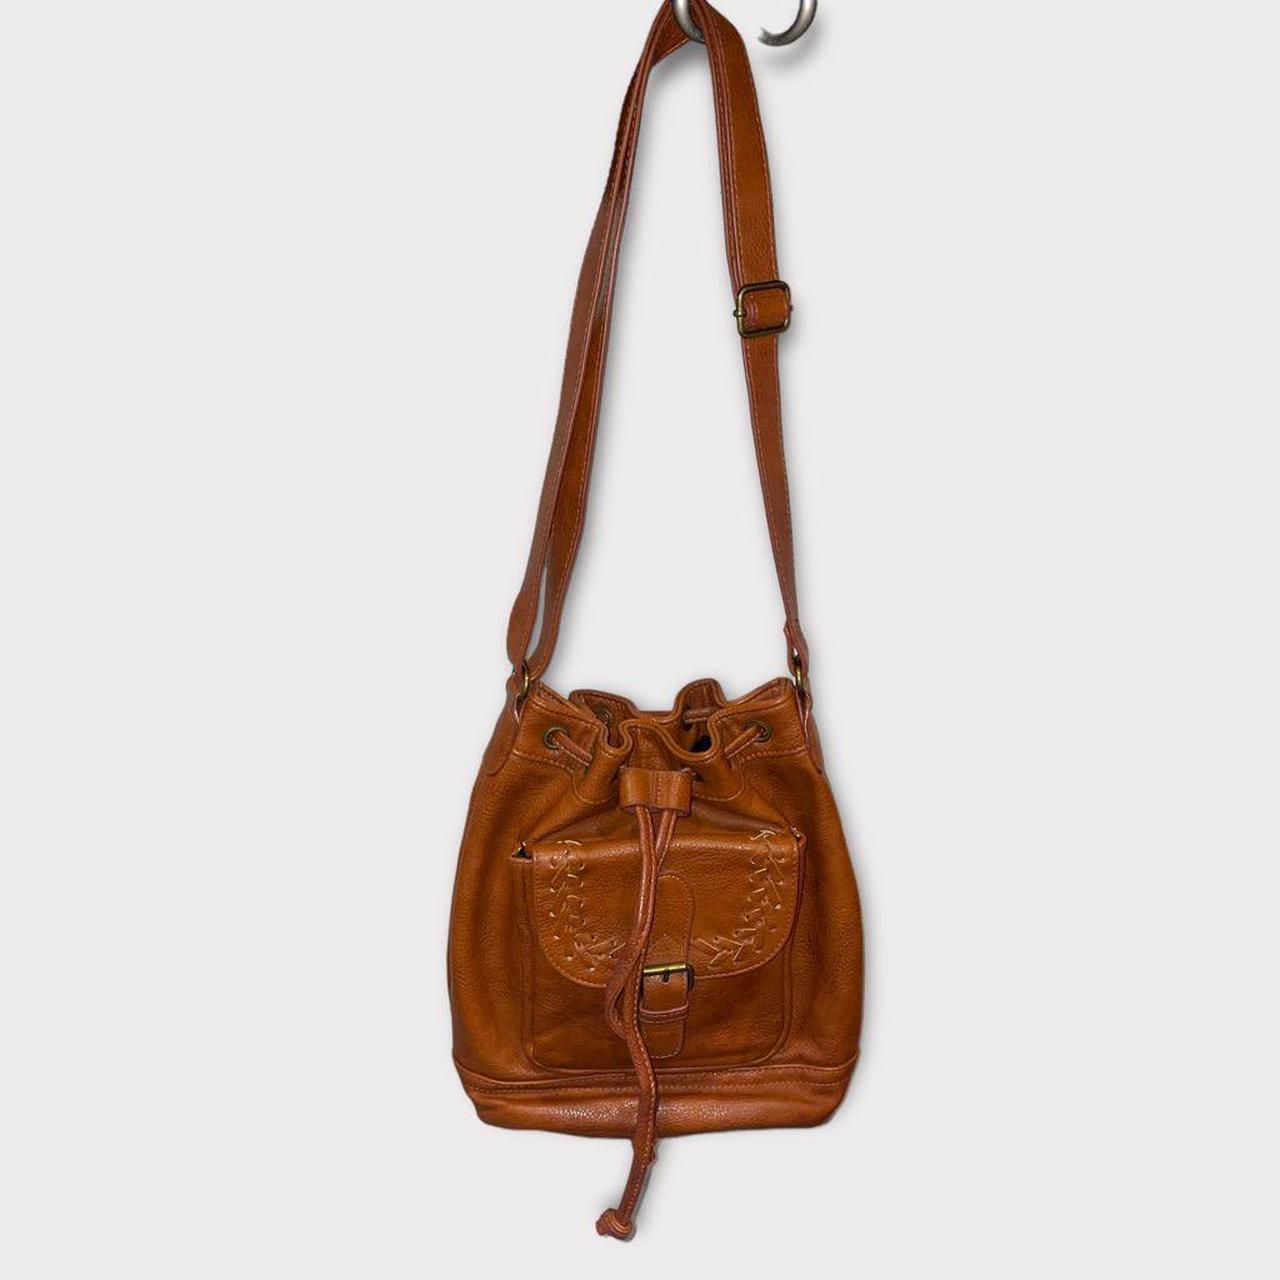 Product Image 2 - This Mossimo bucket bag is